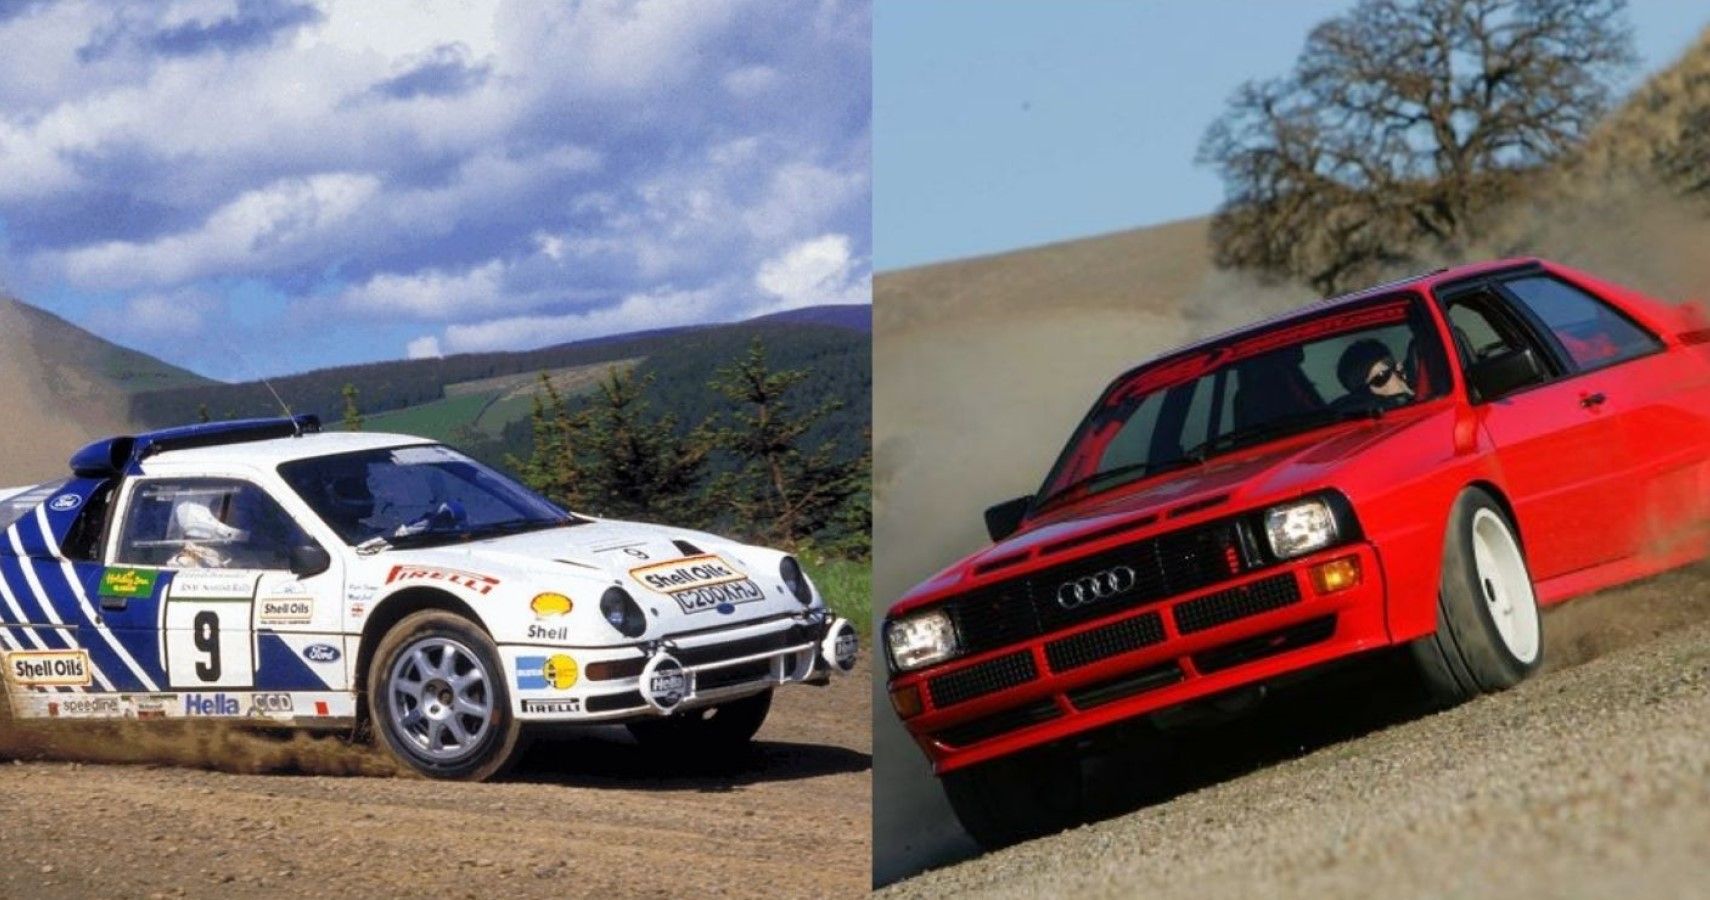 Ford RS200 and Audi Sport Quattro drifting in dirt side-by-side view